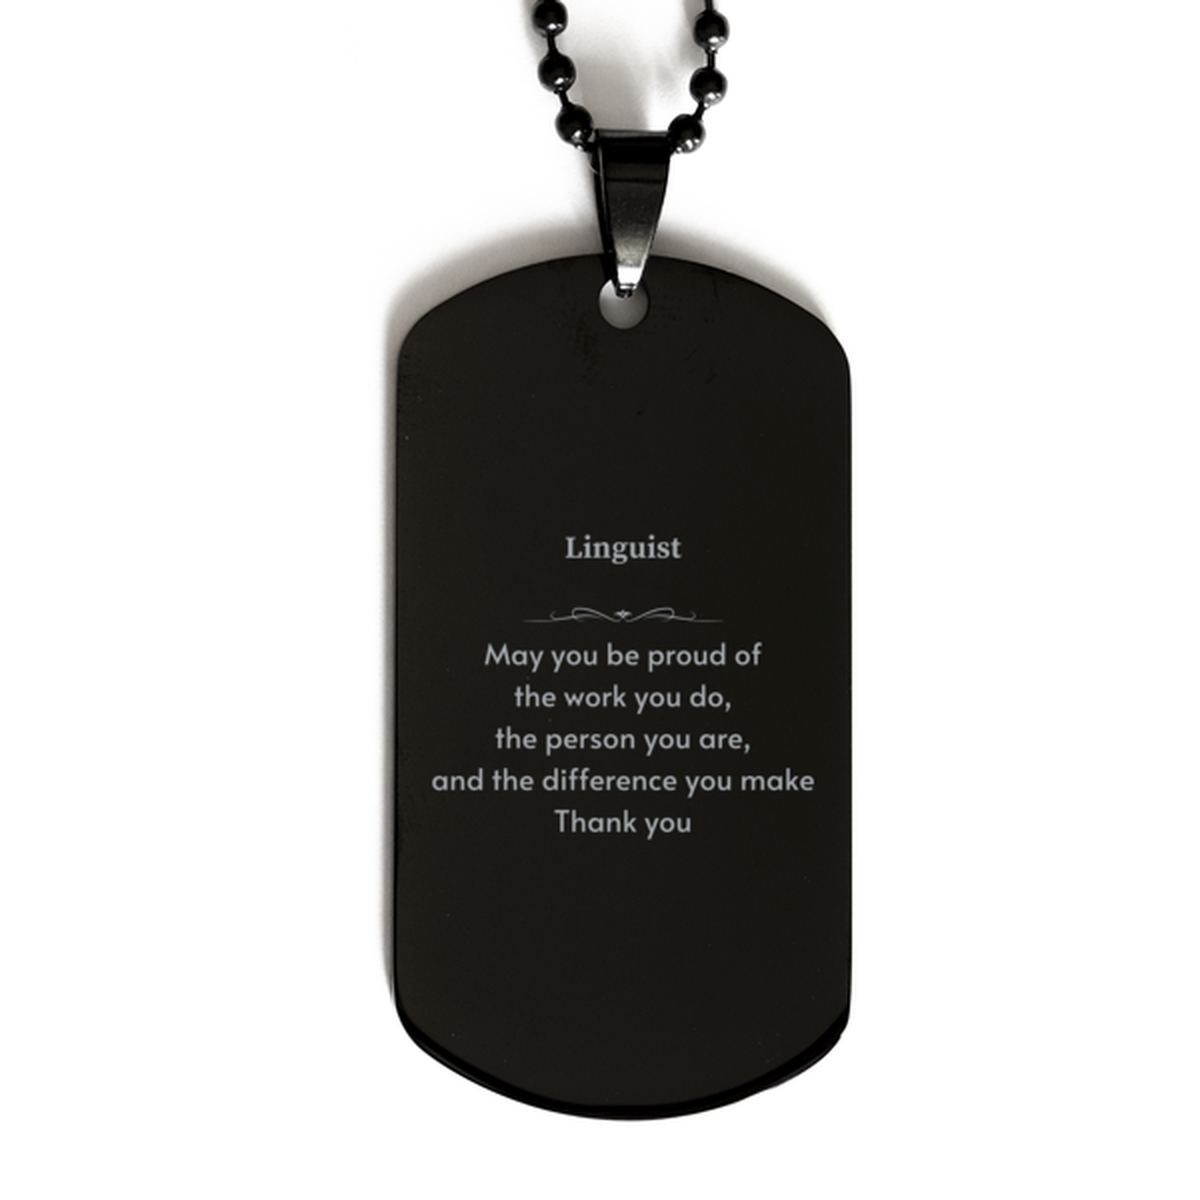 Heartwarming Black Dog Tag Retirement Coworkers Gifts for Linguist, Linguist May You be proud of the work you do, the person you are Gifts for Boss Men Women Friends